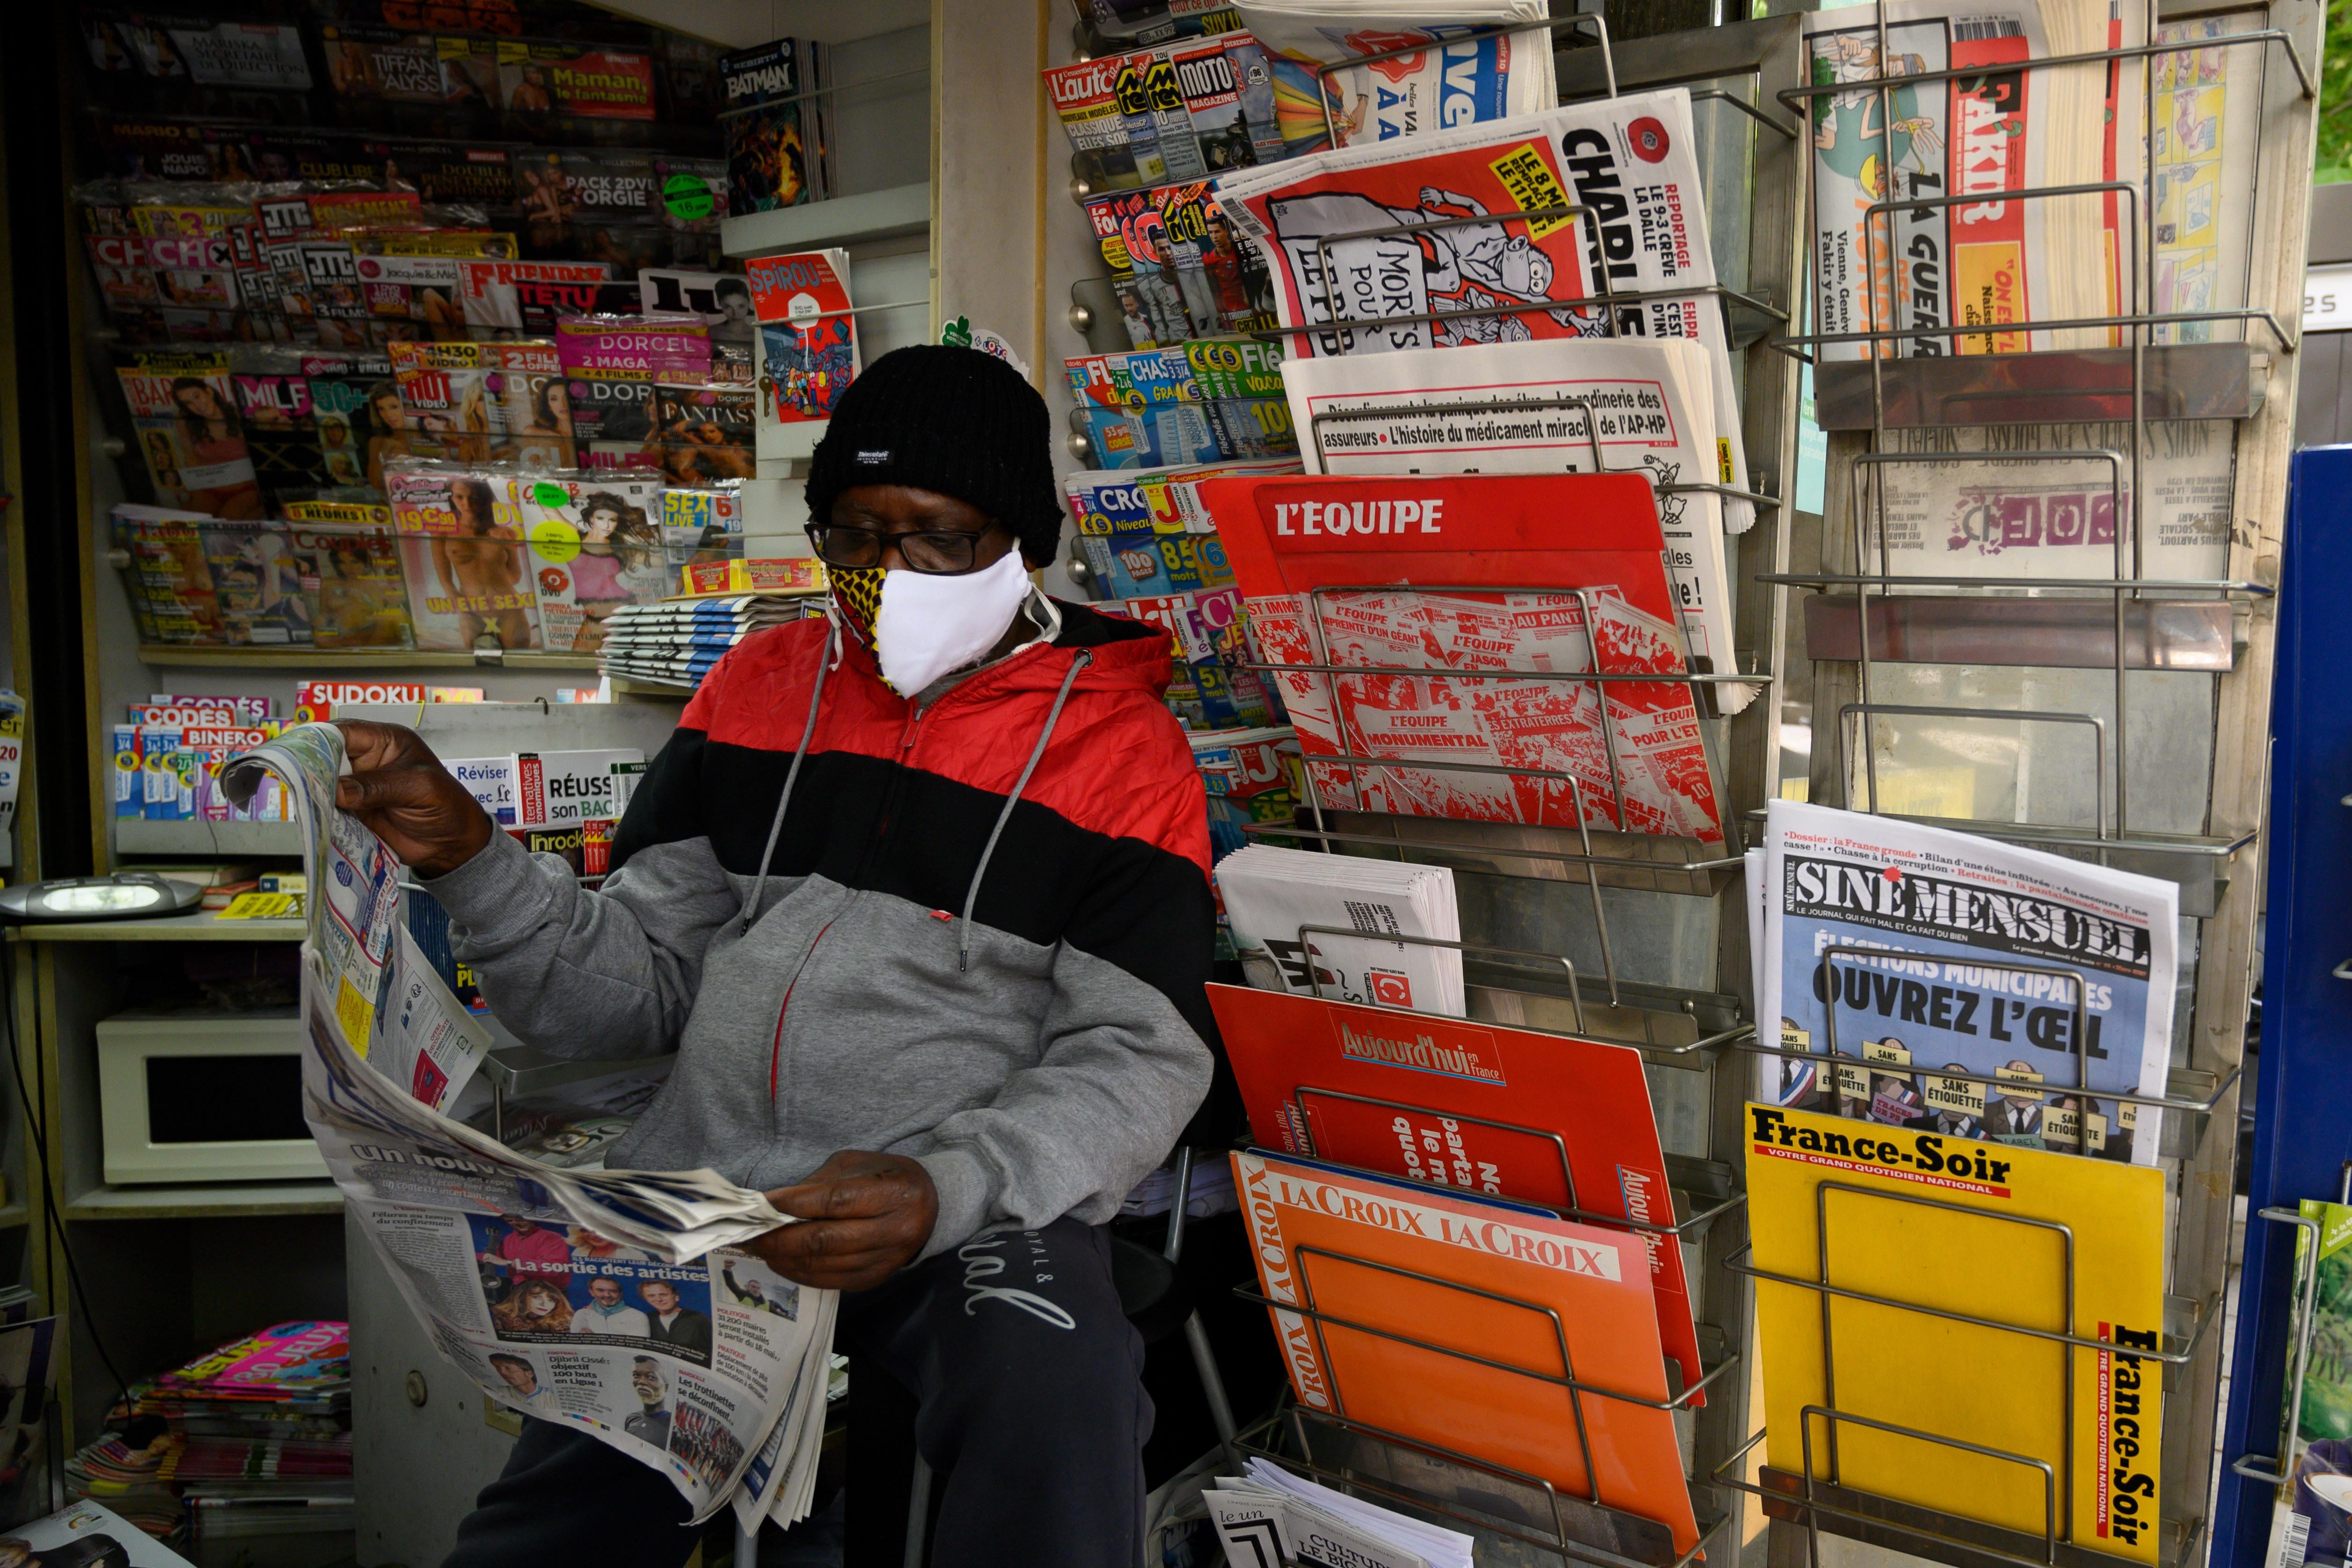 A man reading the local paper at a newsstand in France.